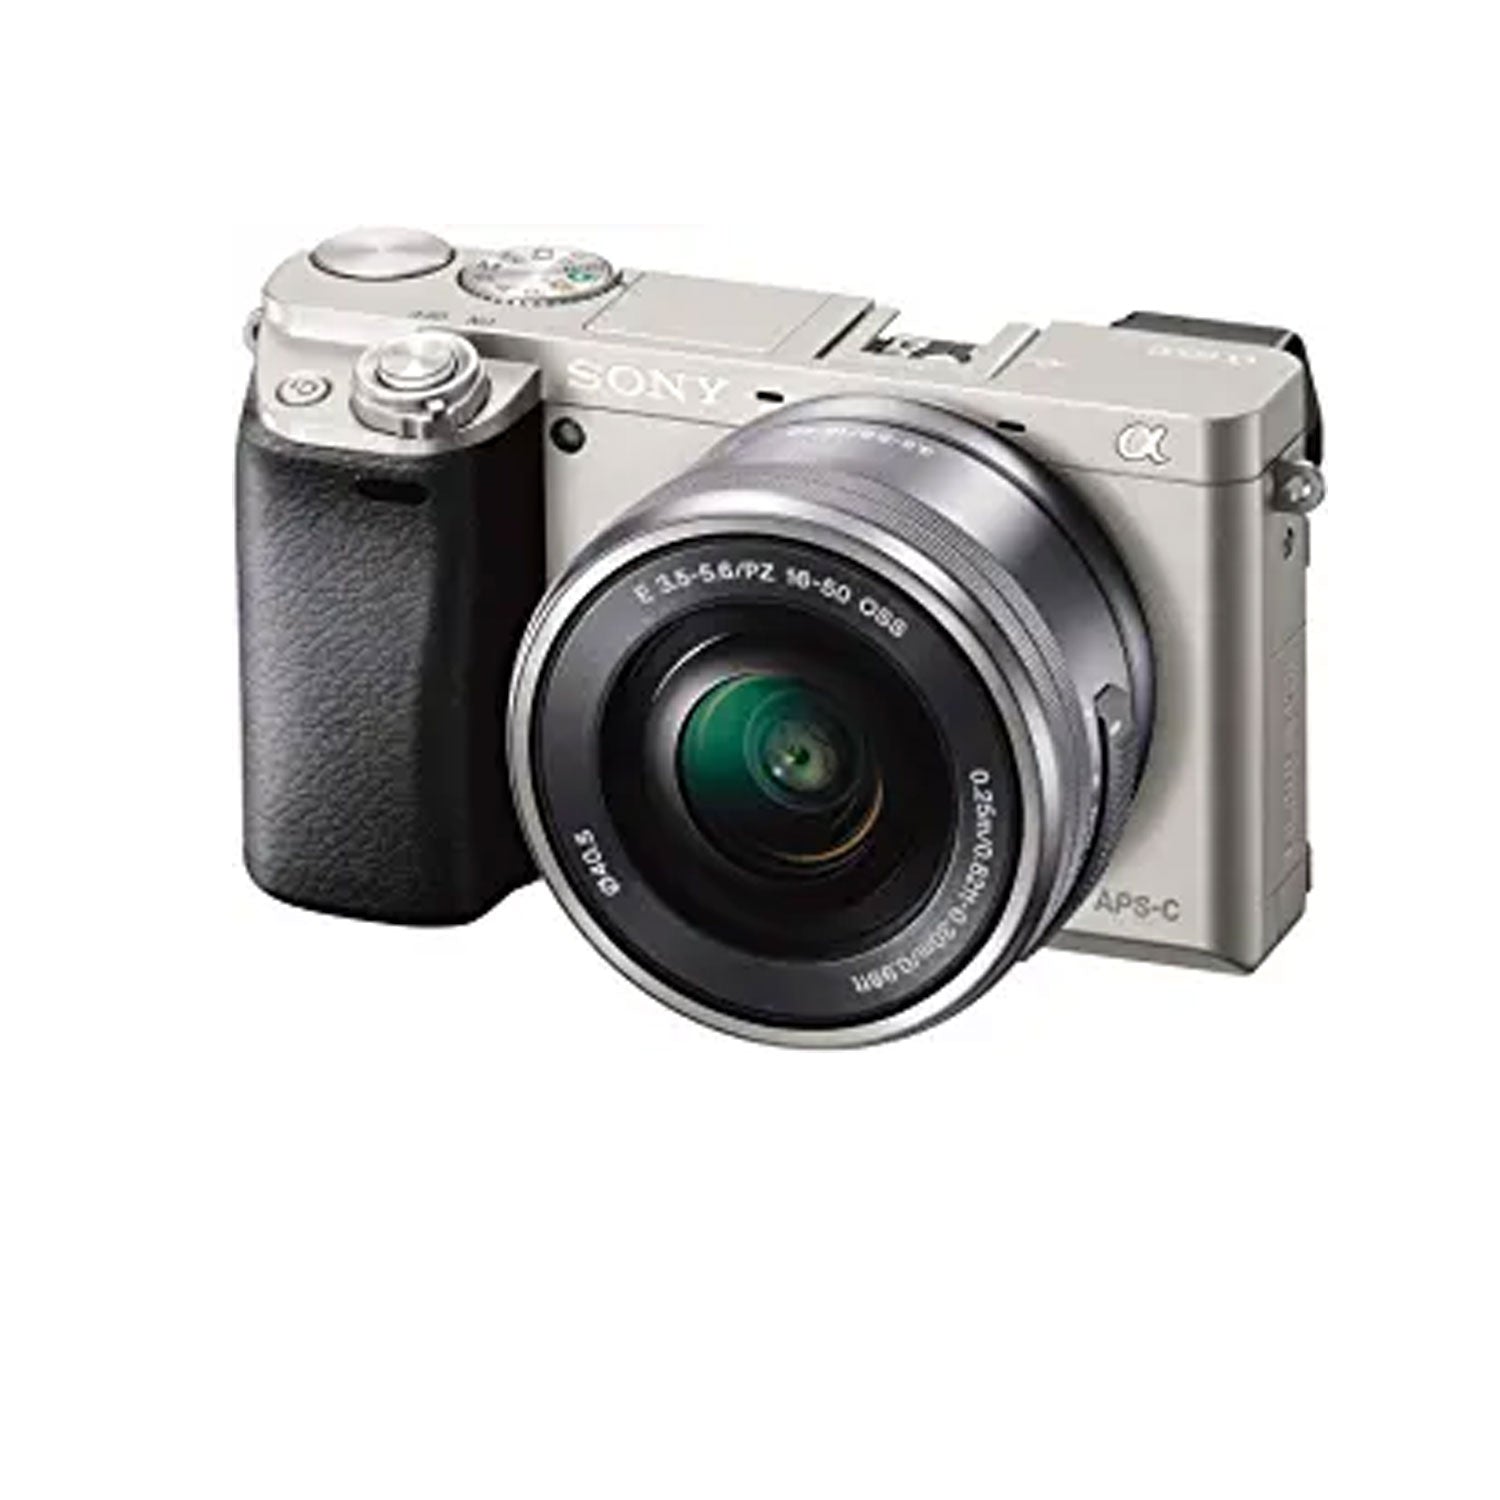 Sony Alpha a6000 Mirrorless Digital Camera with 16-50mm + 55-210mm Lenses (SILVER) with 32GB Memory Card  -International Model